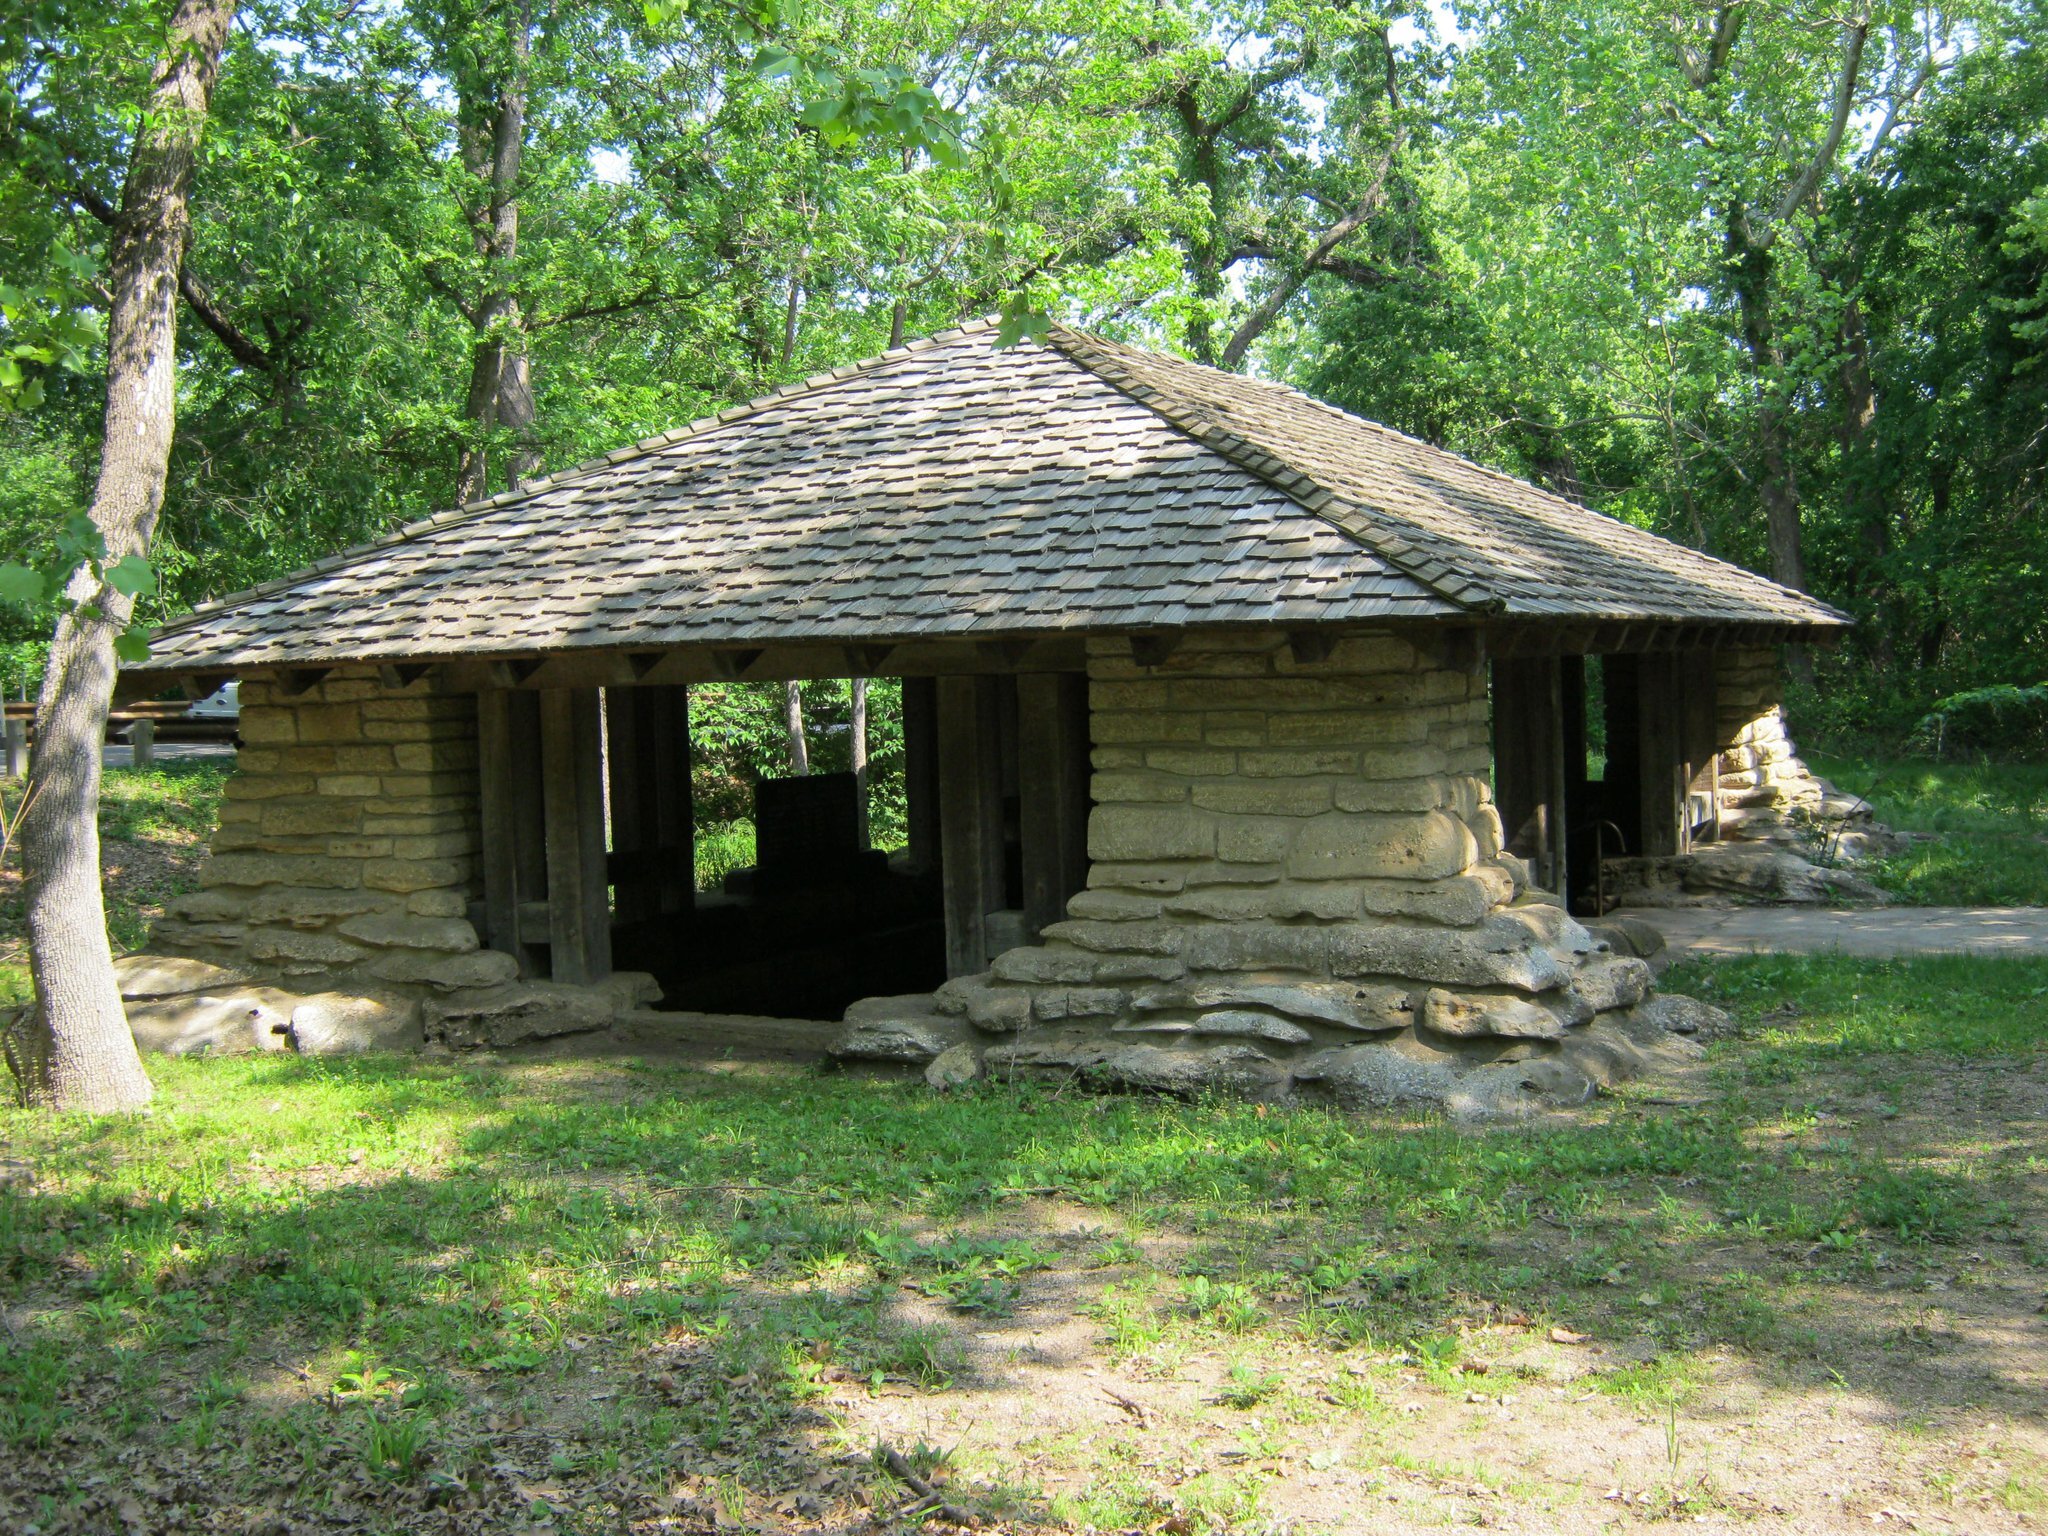 Stone pavilion with shingled roof; wide stone pillars that swell at the base.